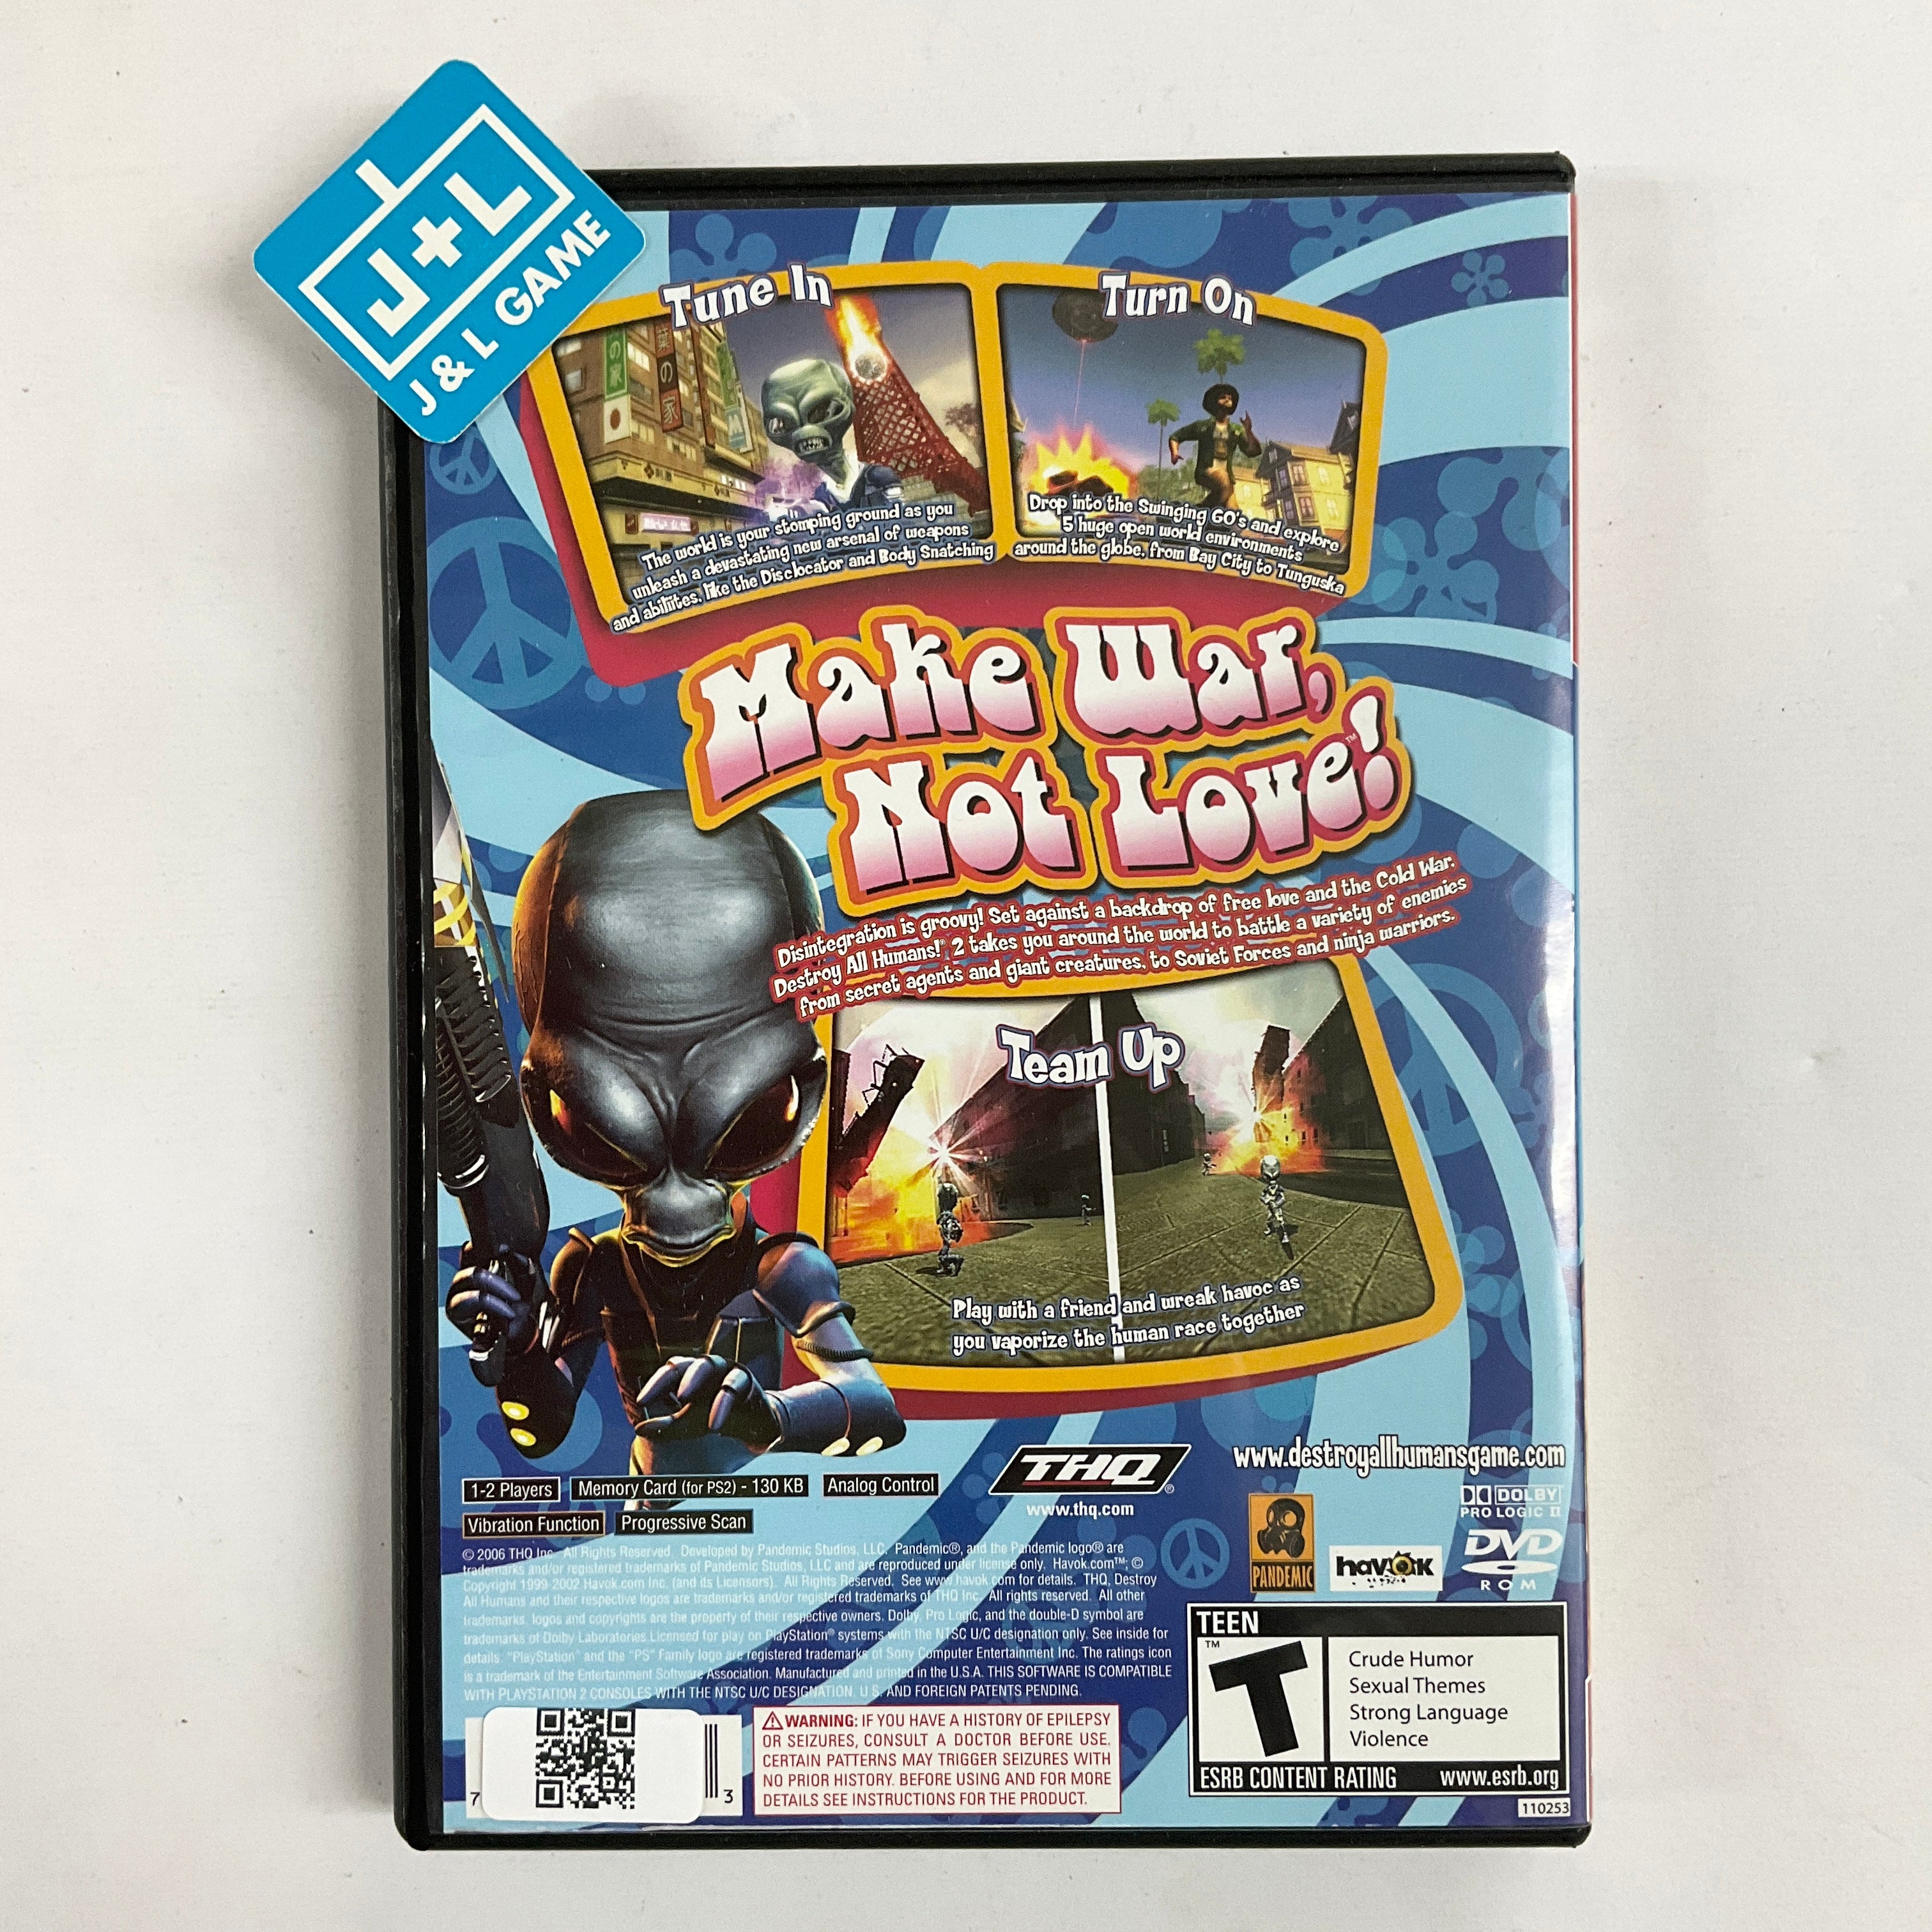 Destroy All Humans! 2 (Greatest Hits) - (PS2) PlayStation 2 [Pre-Owned] Video Games THQ   